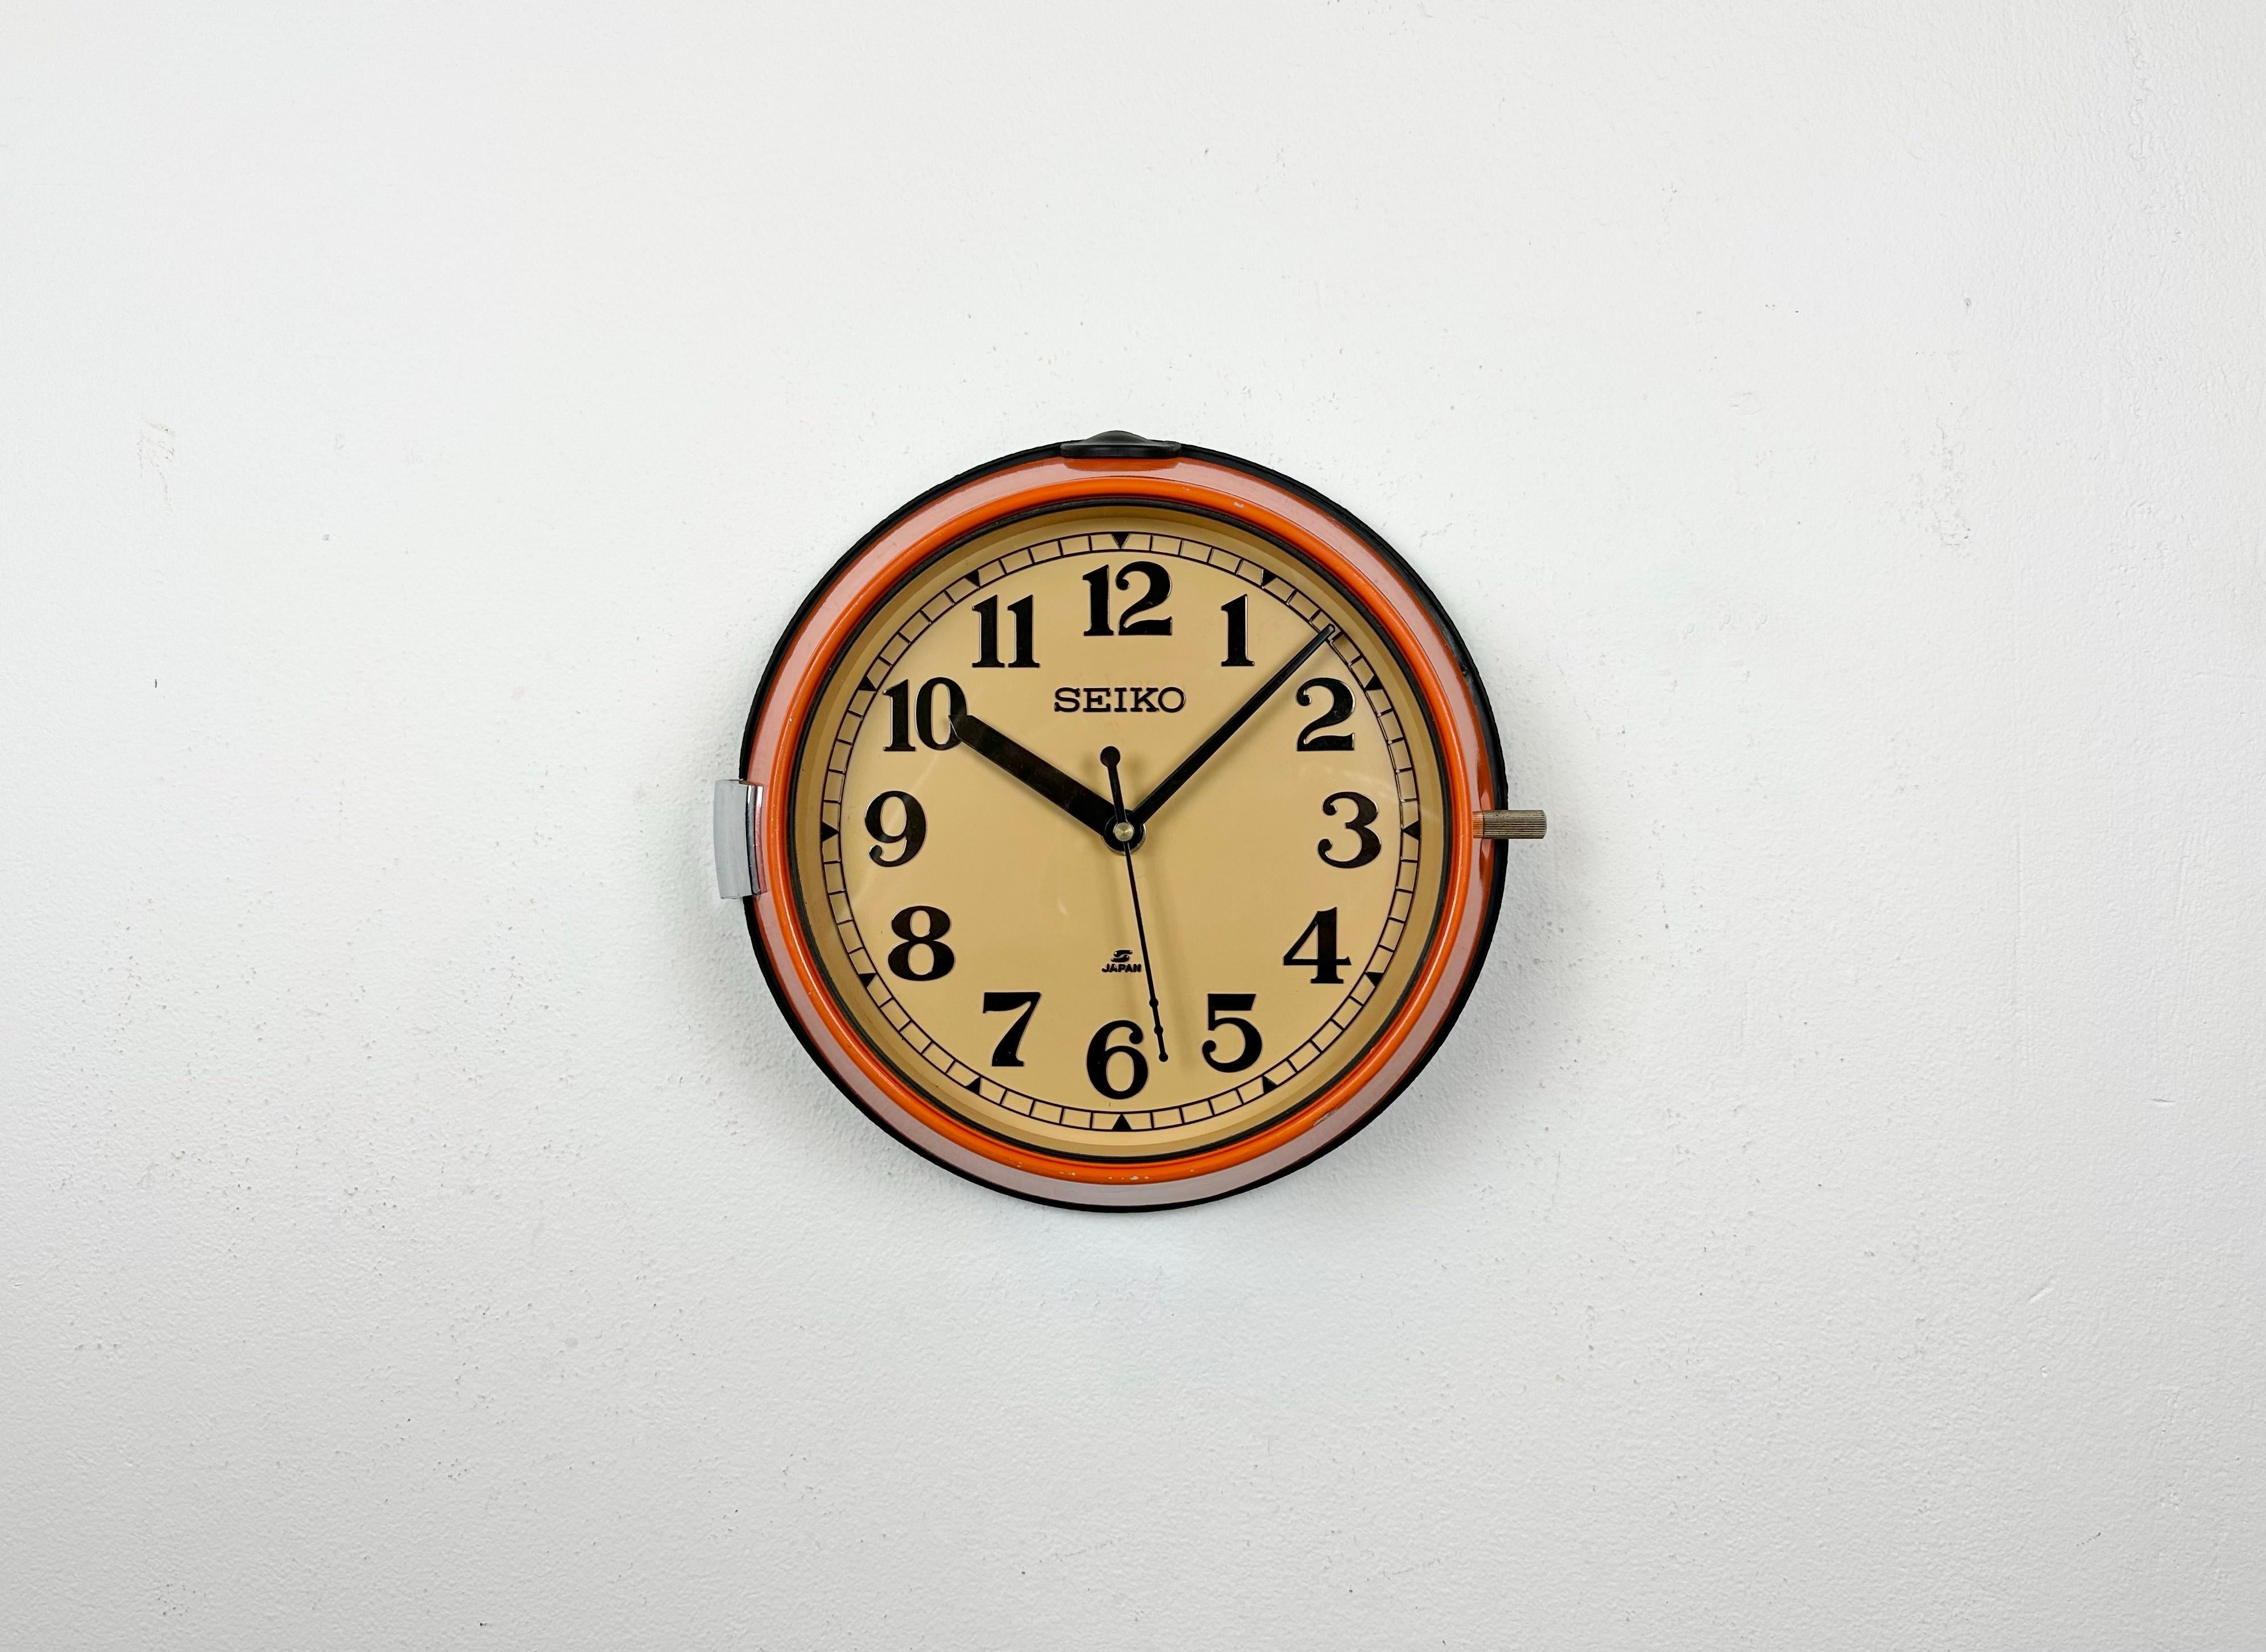 Vintage Seiko navy slave clock designed during the 1970s and produced till 1990s. These clocks were used on large Japanese tankers and cargo ships. It features an orange metal frame, a plastic dial and clear glass cover. This item has been converted